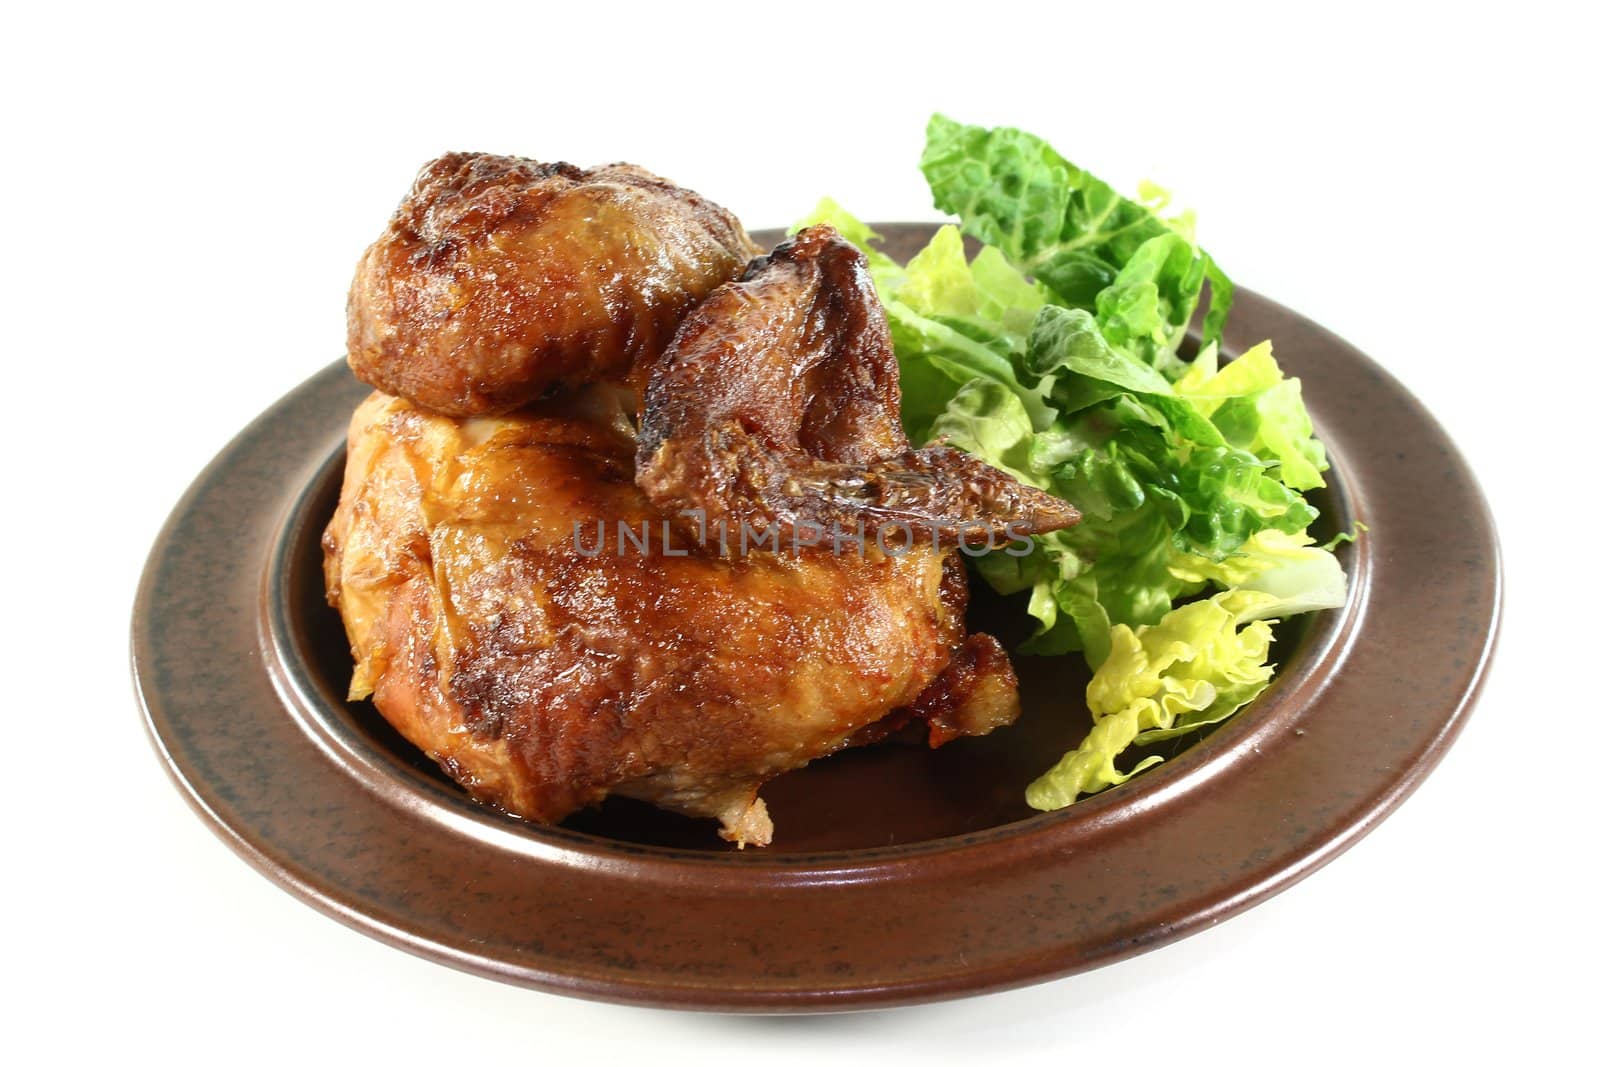 a roast chicken with salad on a plate